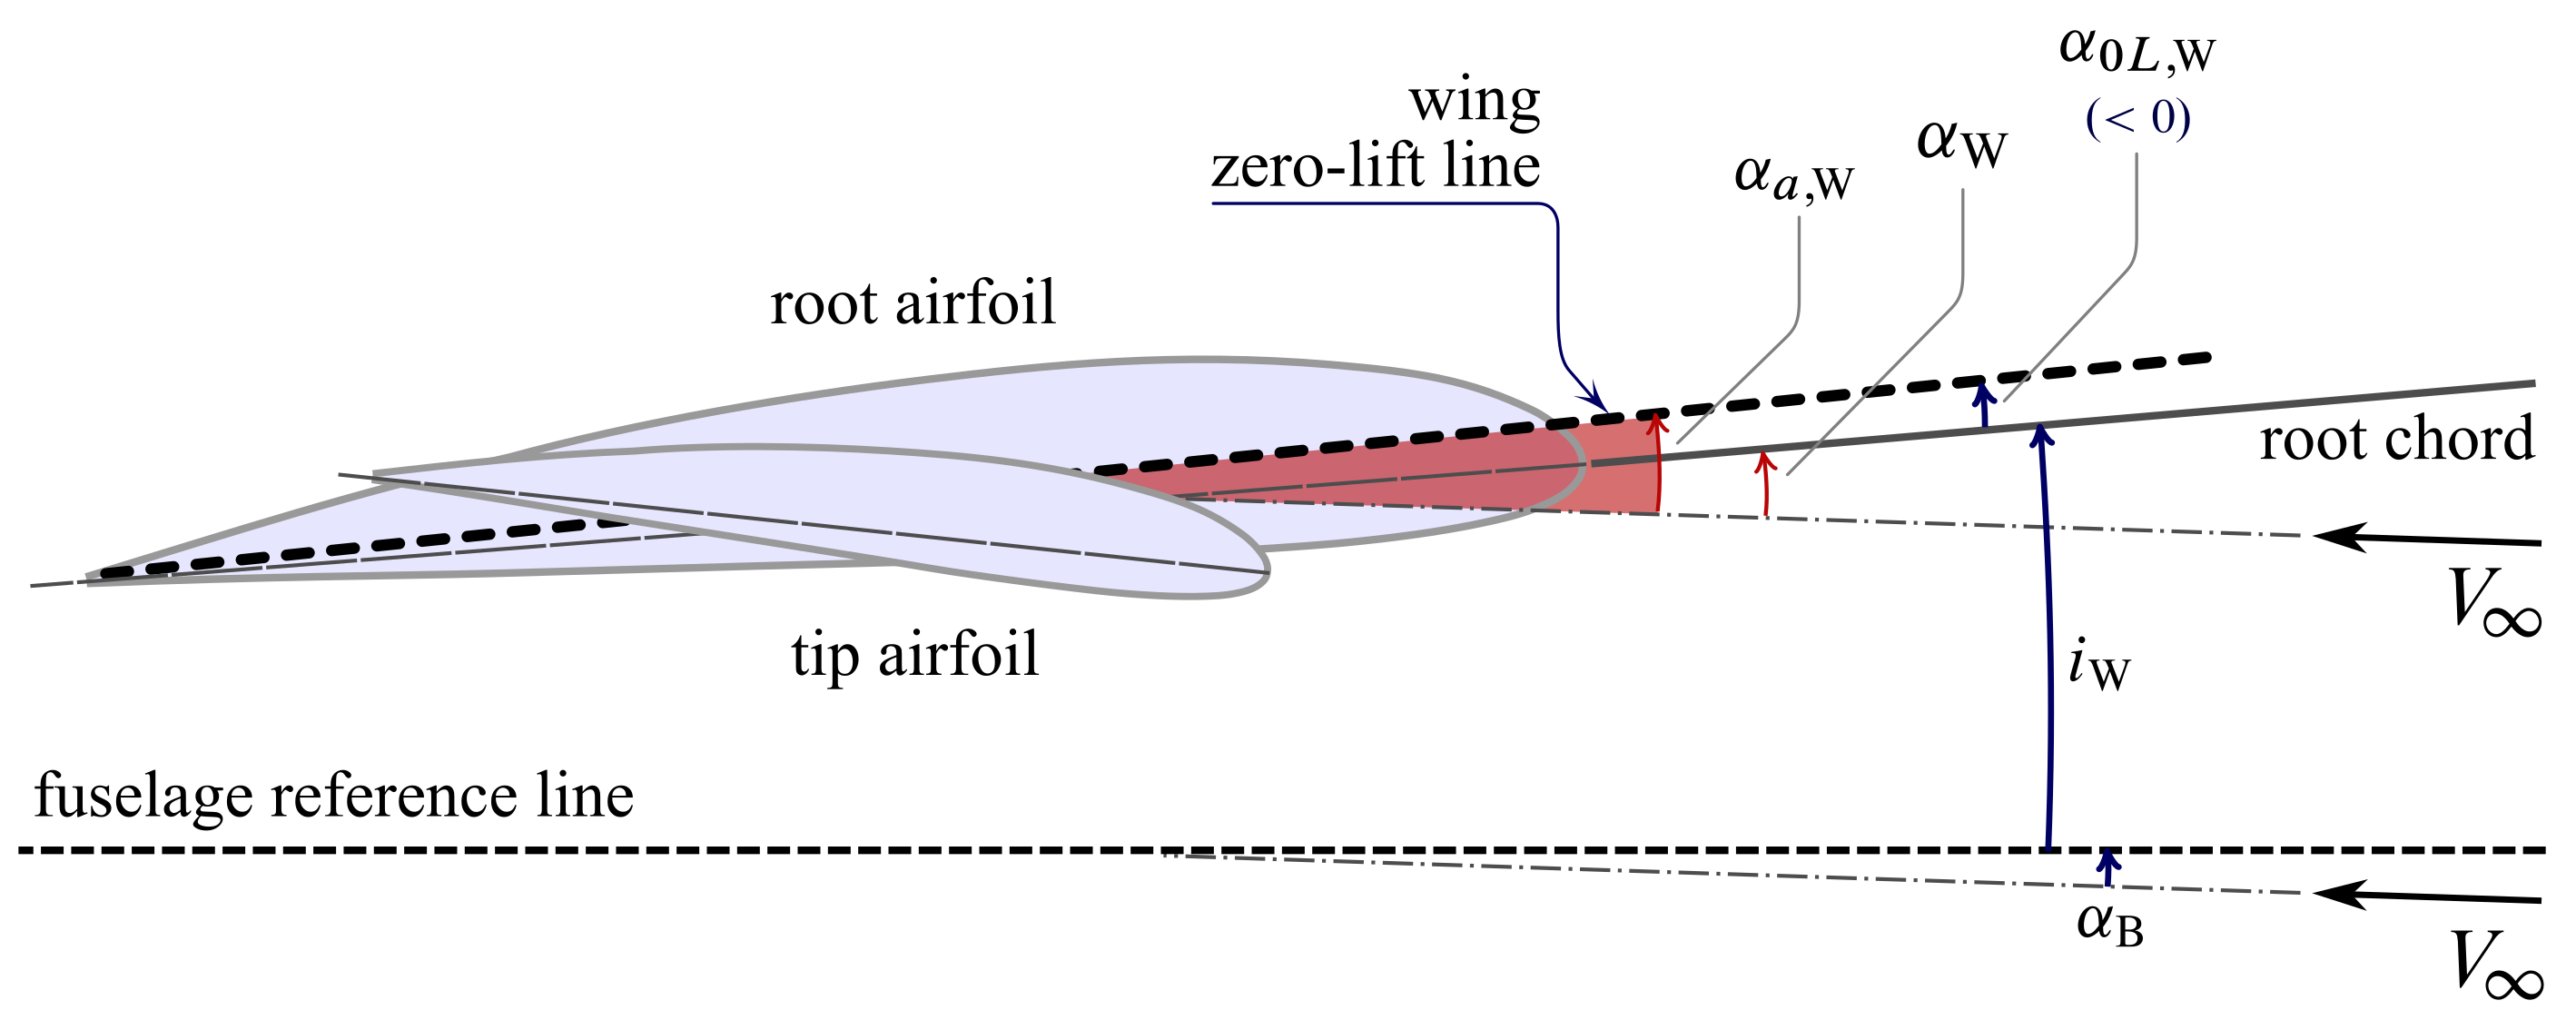 Wing side view. Wing zero-lift line, wing absolute angle of attack $\alpha_{\mathrm{a,W}}$, and aircraft angle of attack $\alpha_{\mathrm{B}}$.